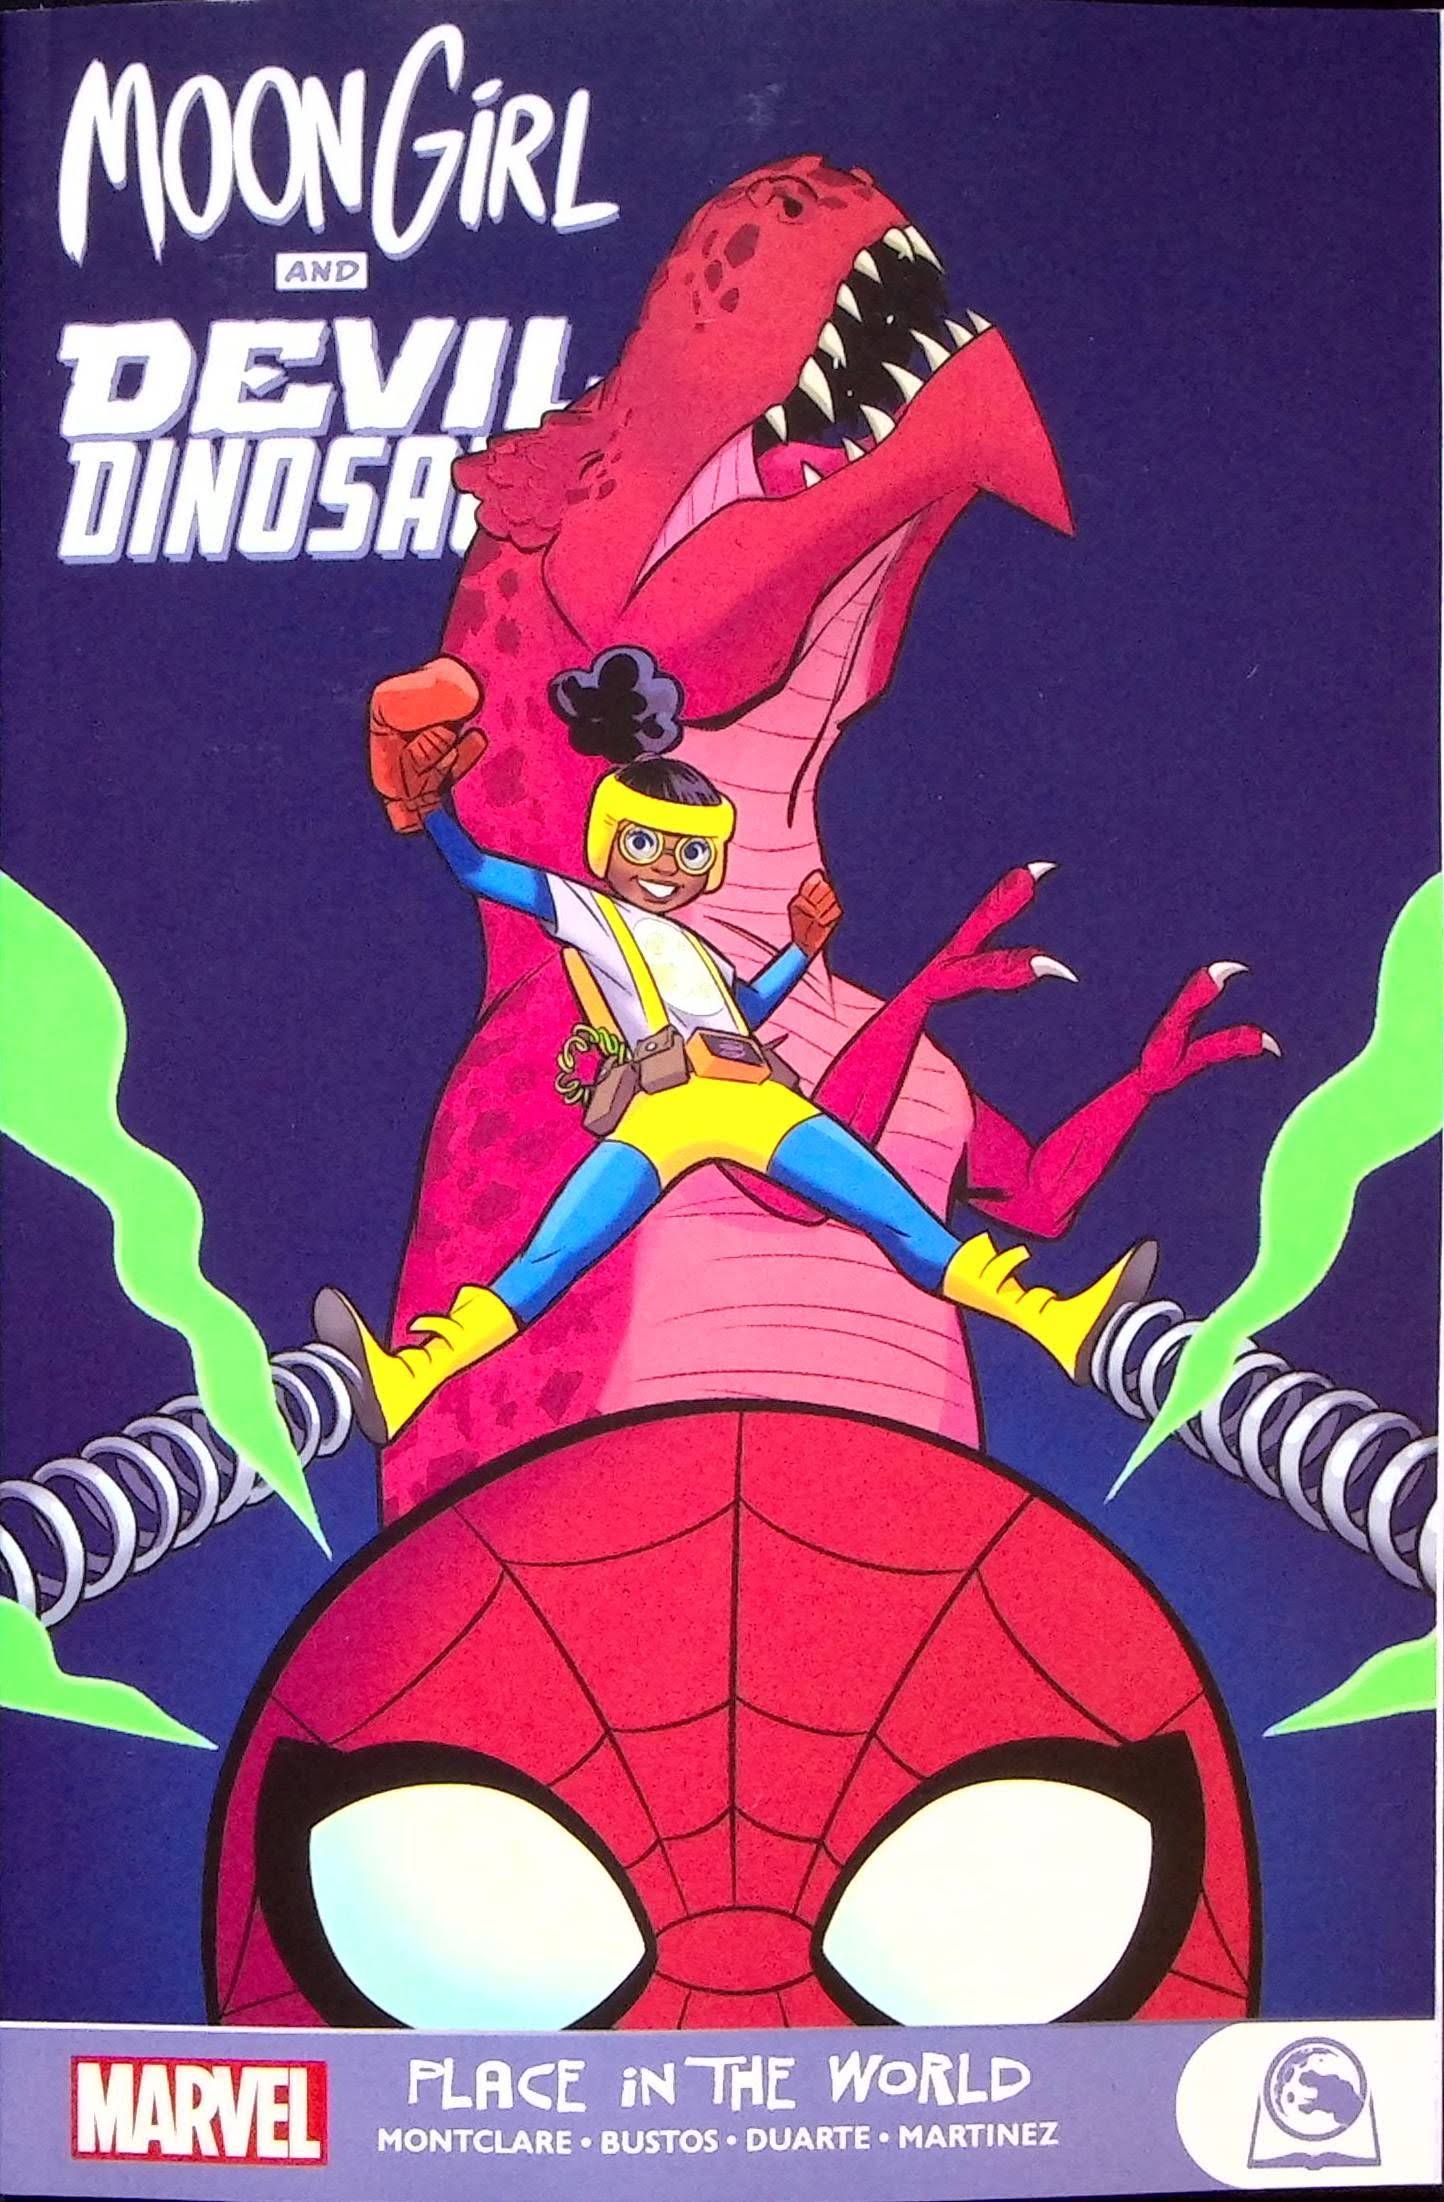 Moon Girl and the Devil Dinosaur book cover